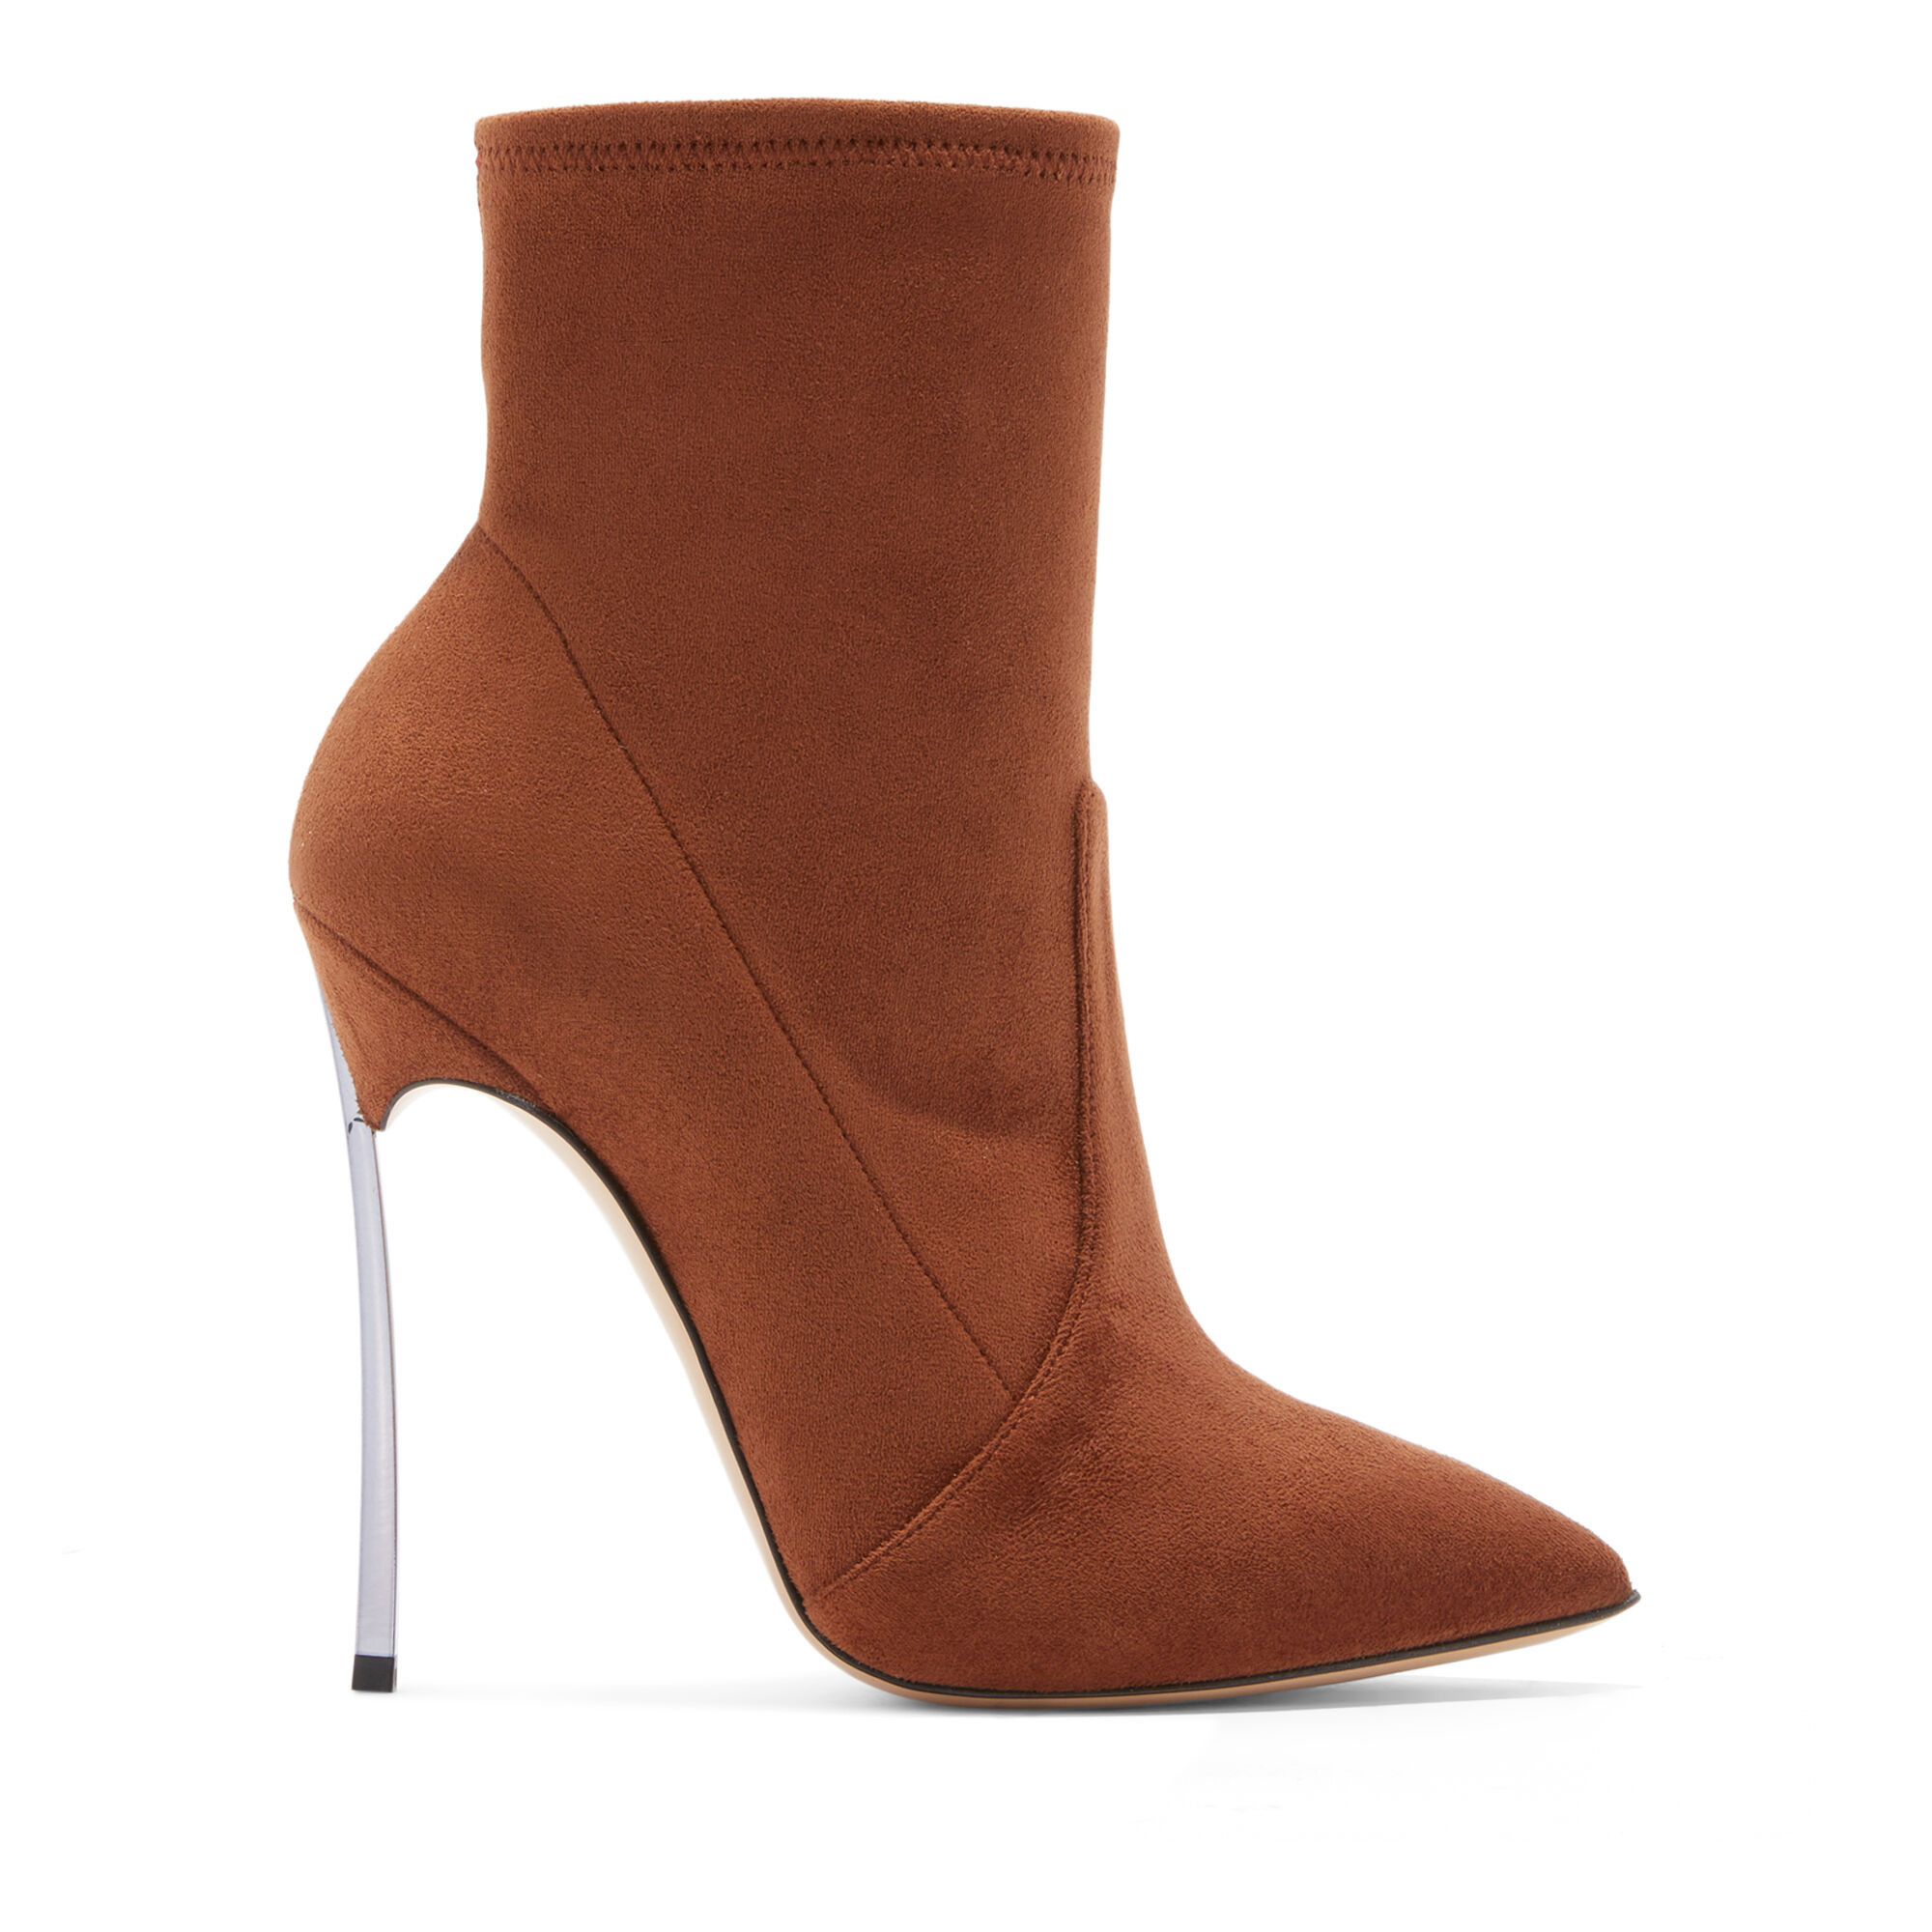 Blade ankle boots in soft rodeo